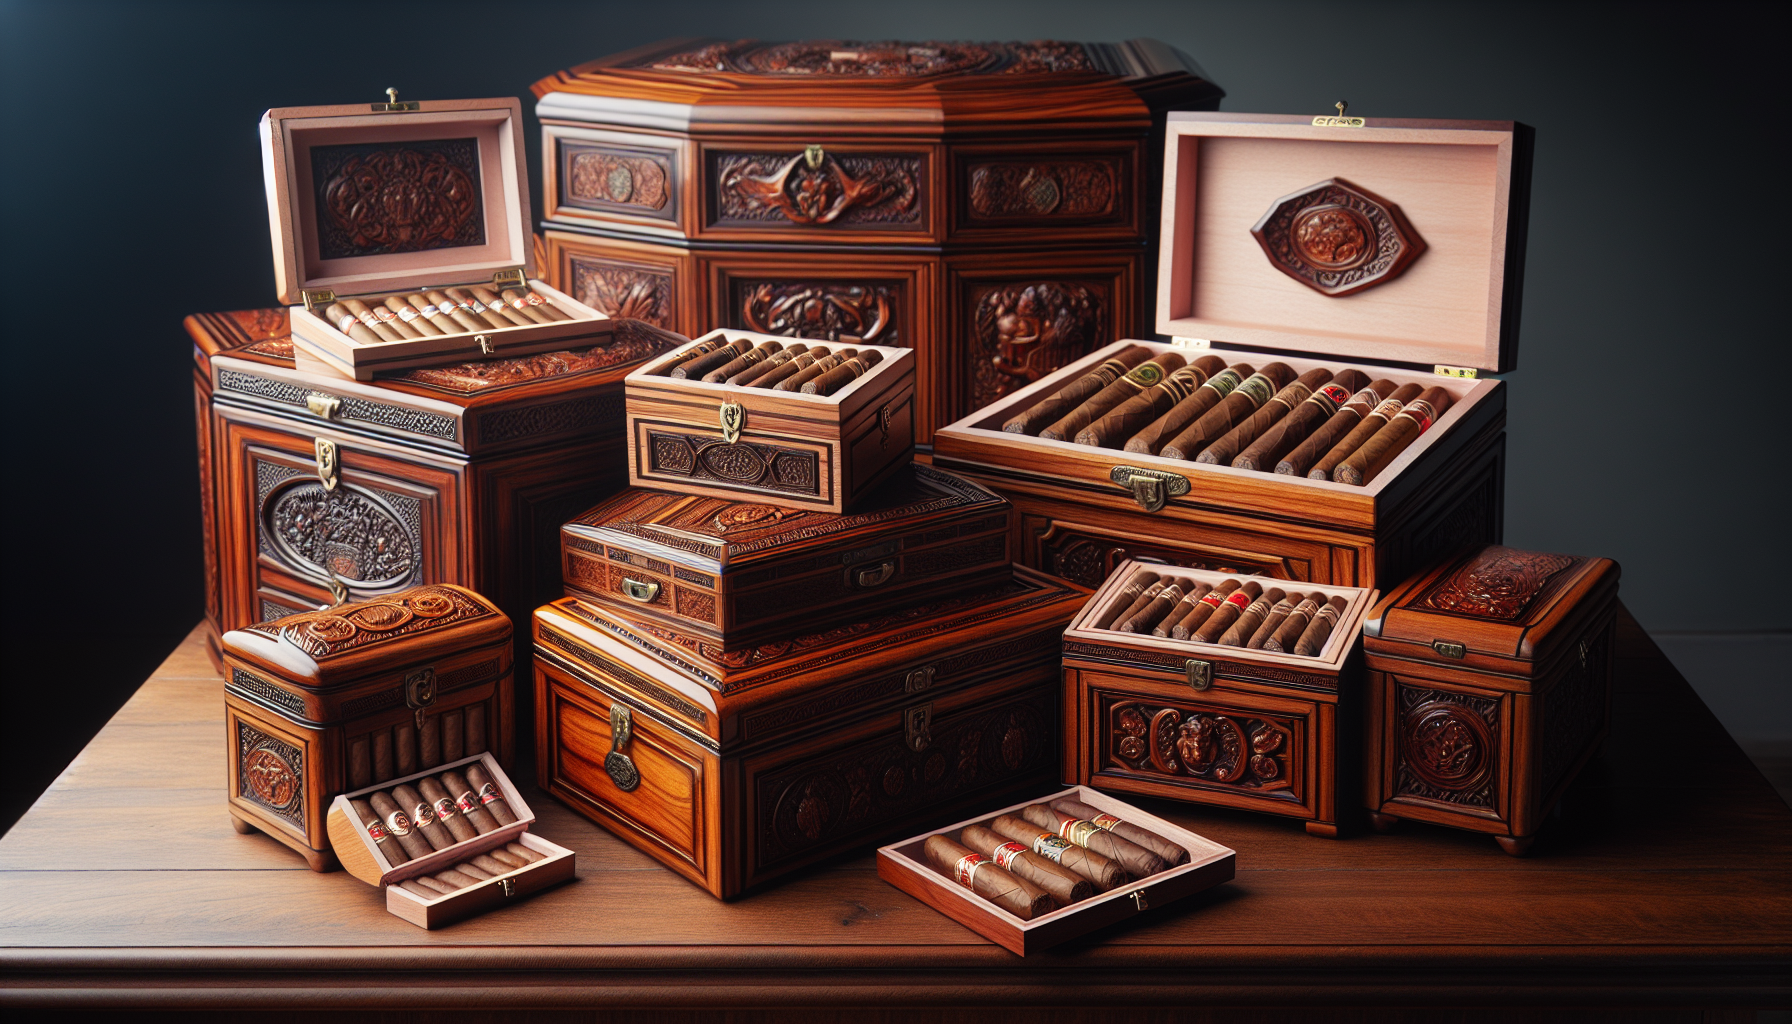 Choosing the right size for your cigar collection